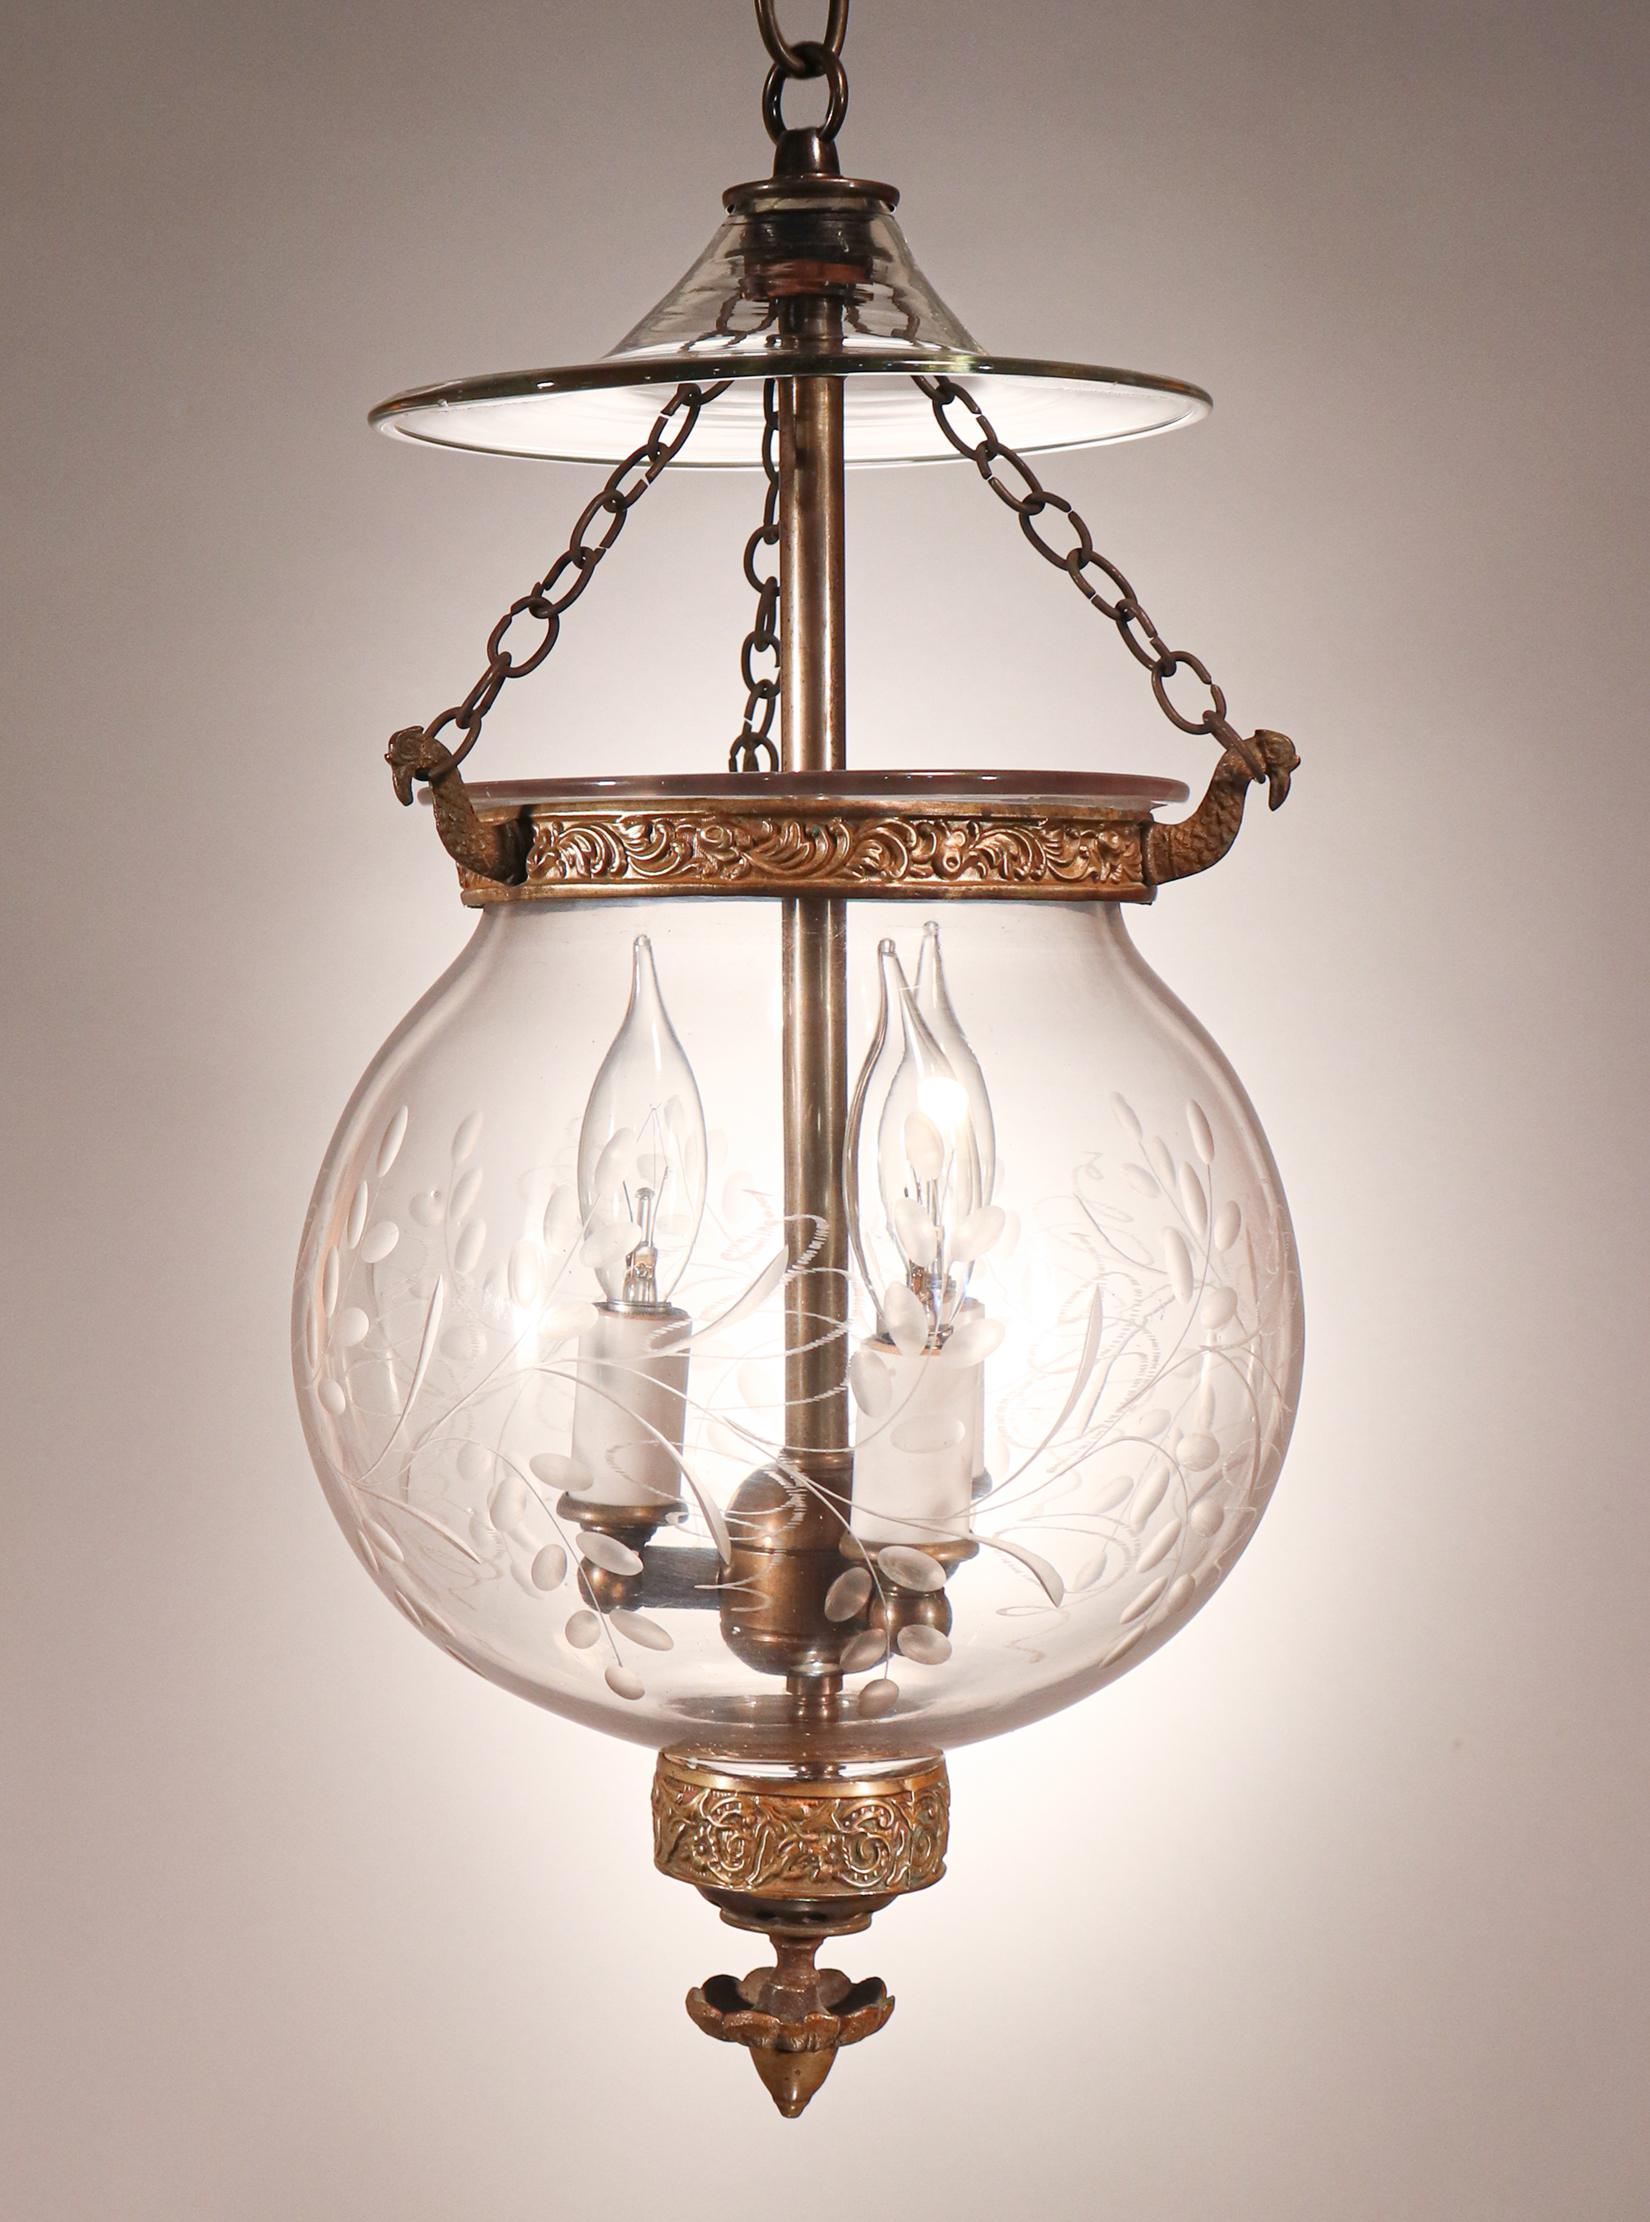 An exceptional bell jar lantern in our collection, this circa 1860 English globe pendant has lovely form and features all-original brass fittings—including its embossed brass band, ornamental finial/candle holder base, and strands of chain. The